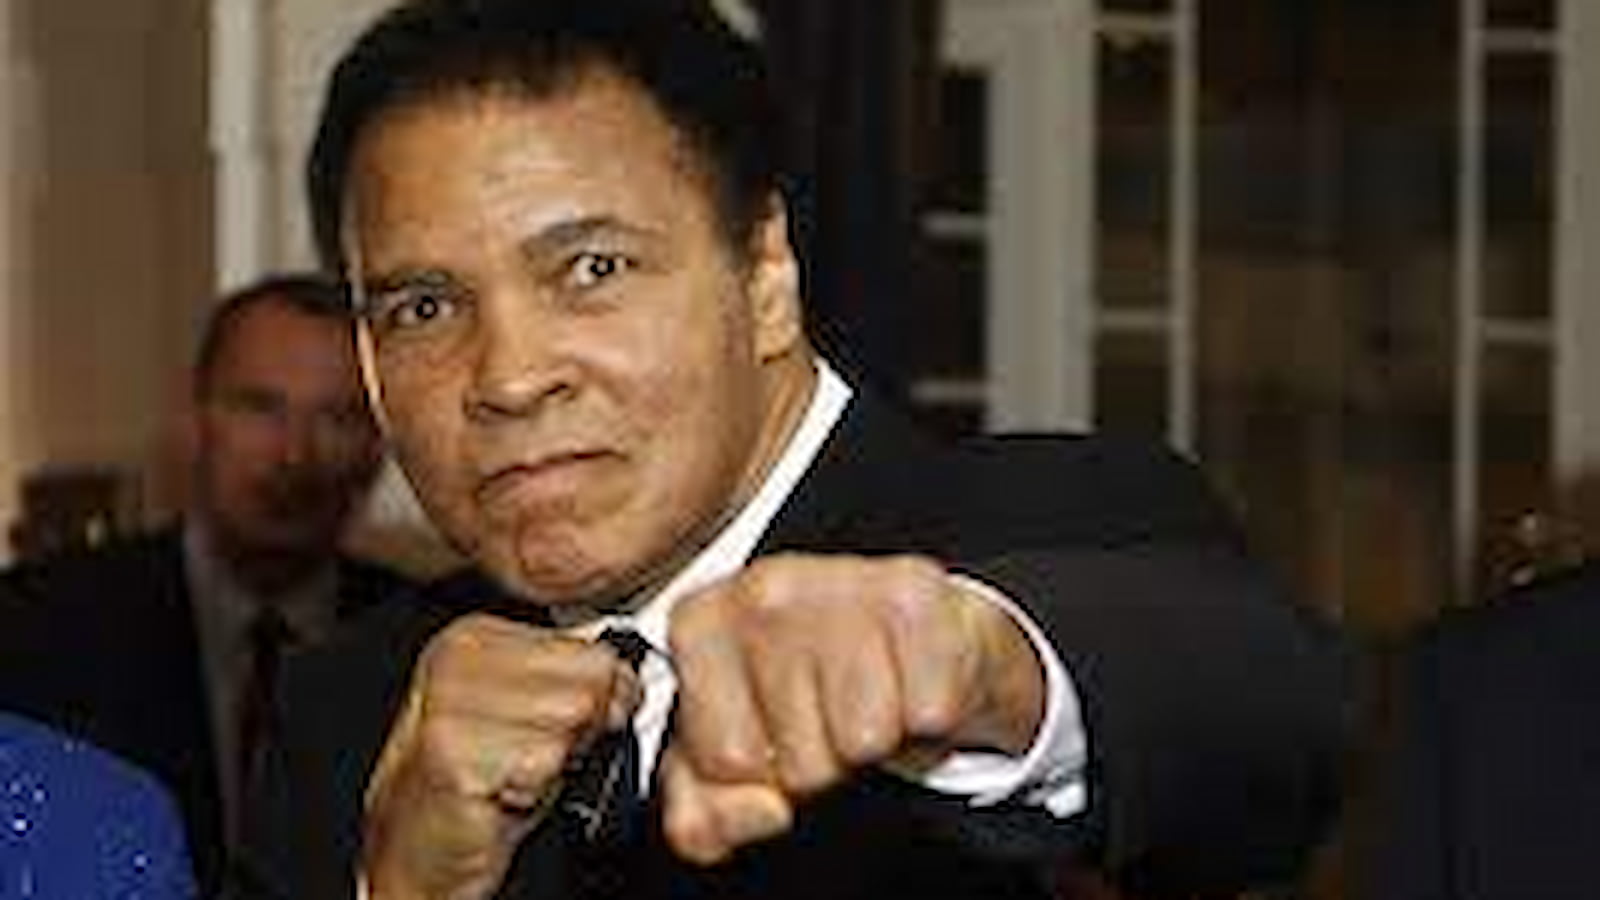 Muhammad Ali Biography: Age, Height, Career, Family, Personal Life, Net Worth